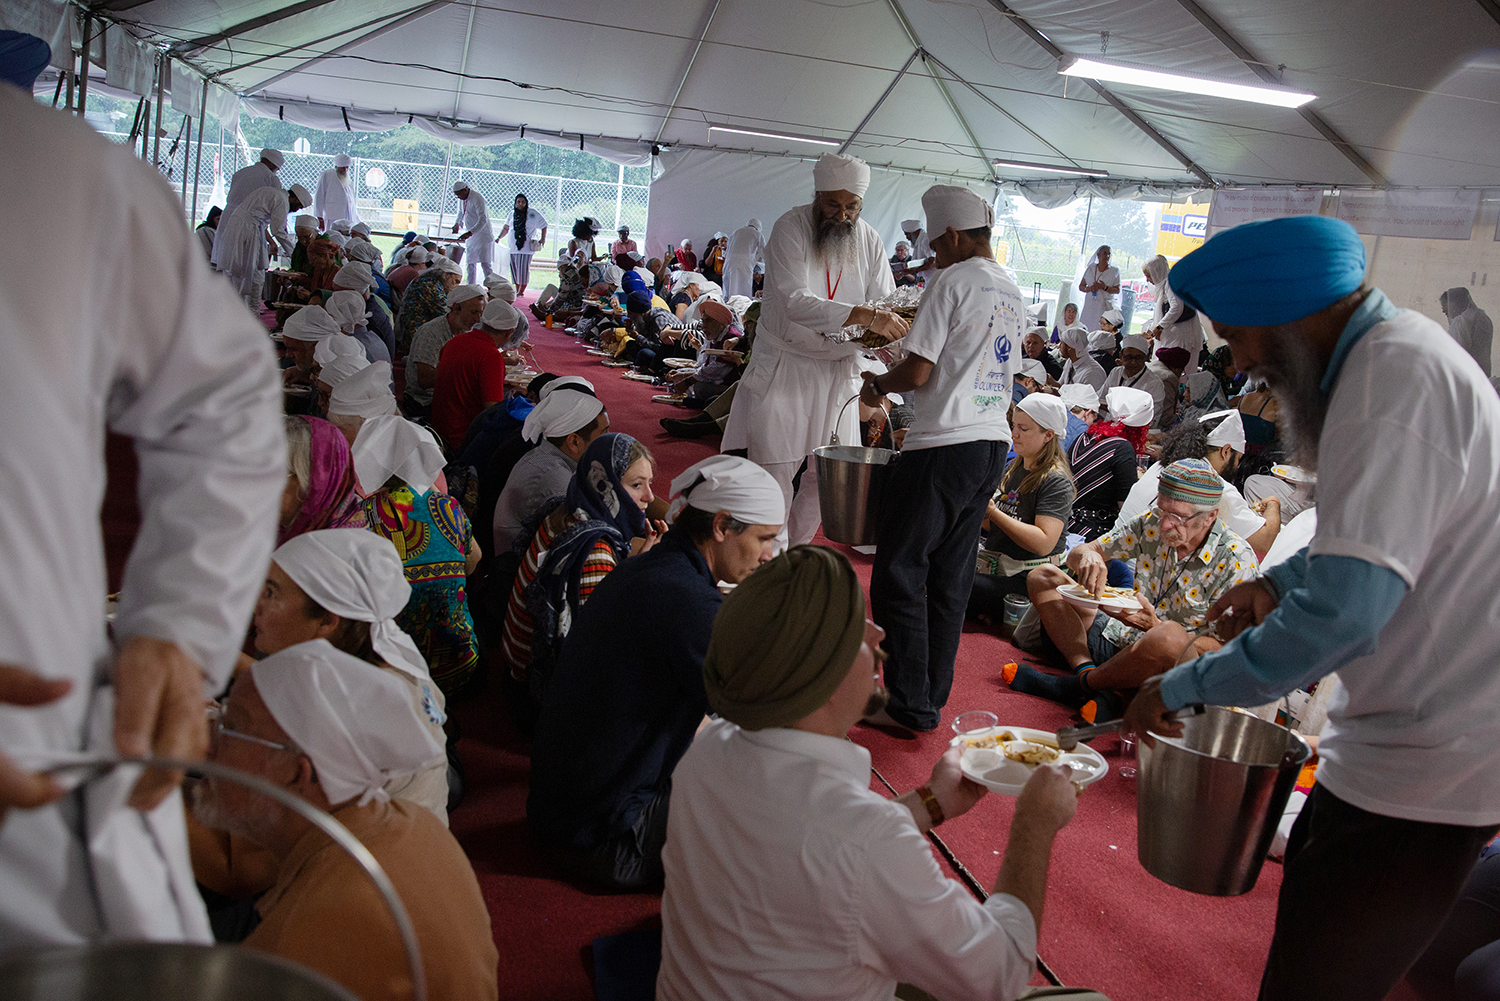 Sikhs distribute a langar lunch to attendees of the Parliament of the World’s Religions in downtown Chicago on Aug. 14, 2023. Photo by Lauren Pond for RNS